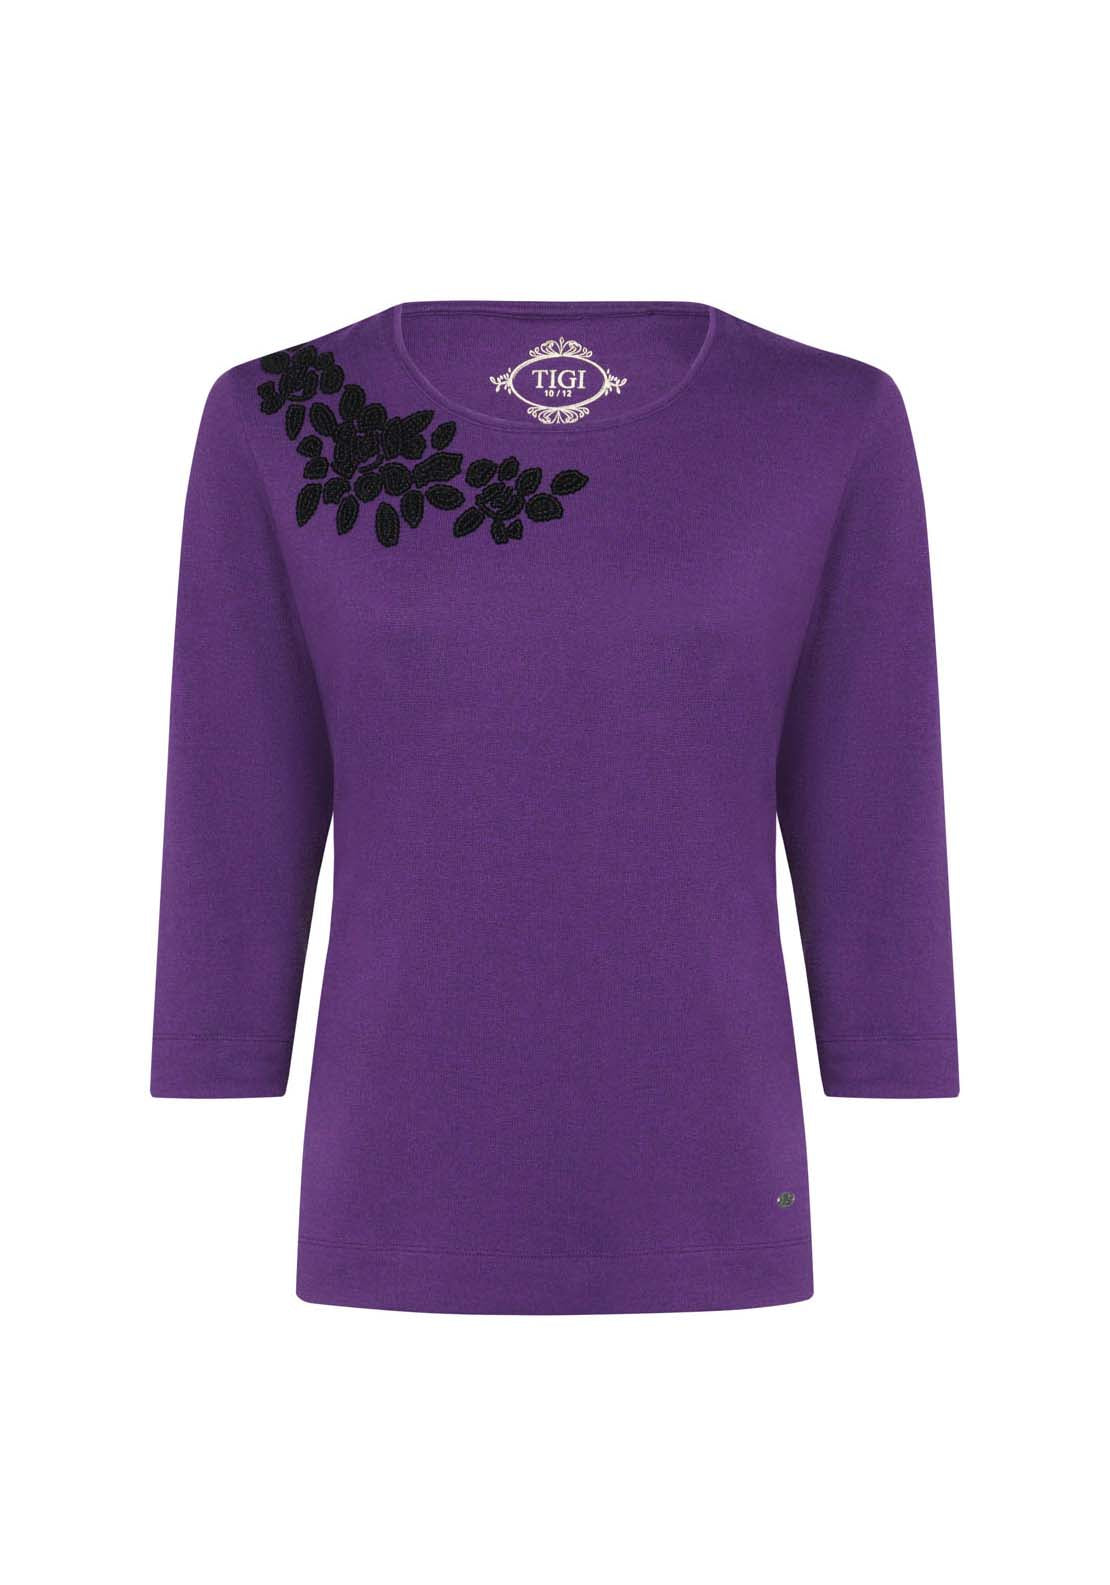 Tigiwear Embellished Lilac Cowl Neck Top 4 Shaws Department Stores